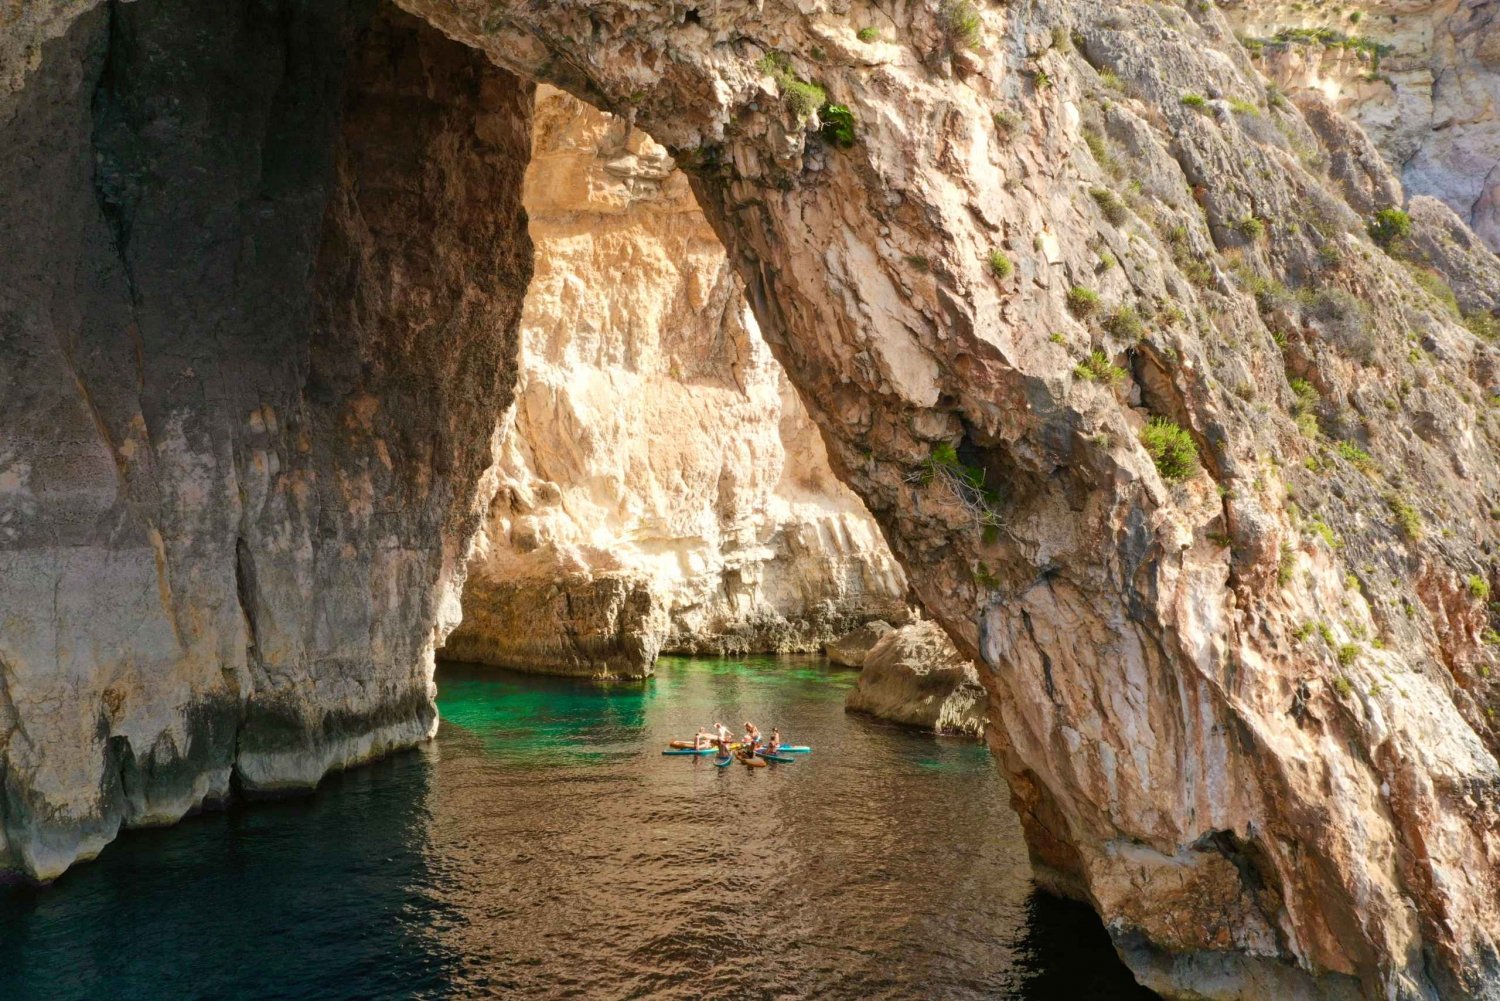 Qrendi: SUP Tour and Snorkeling at Blue Grotto